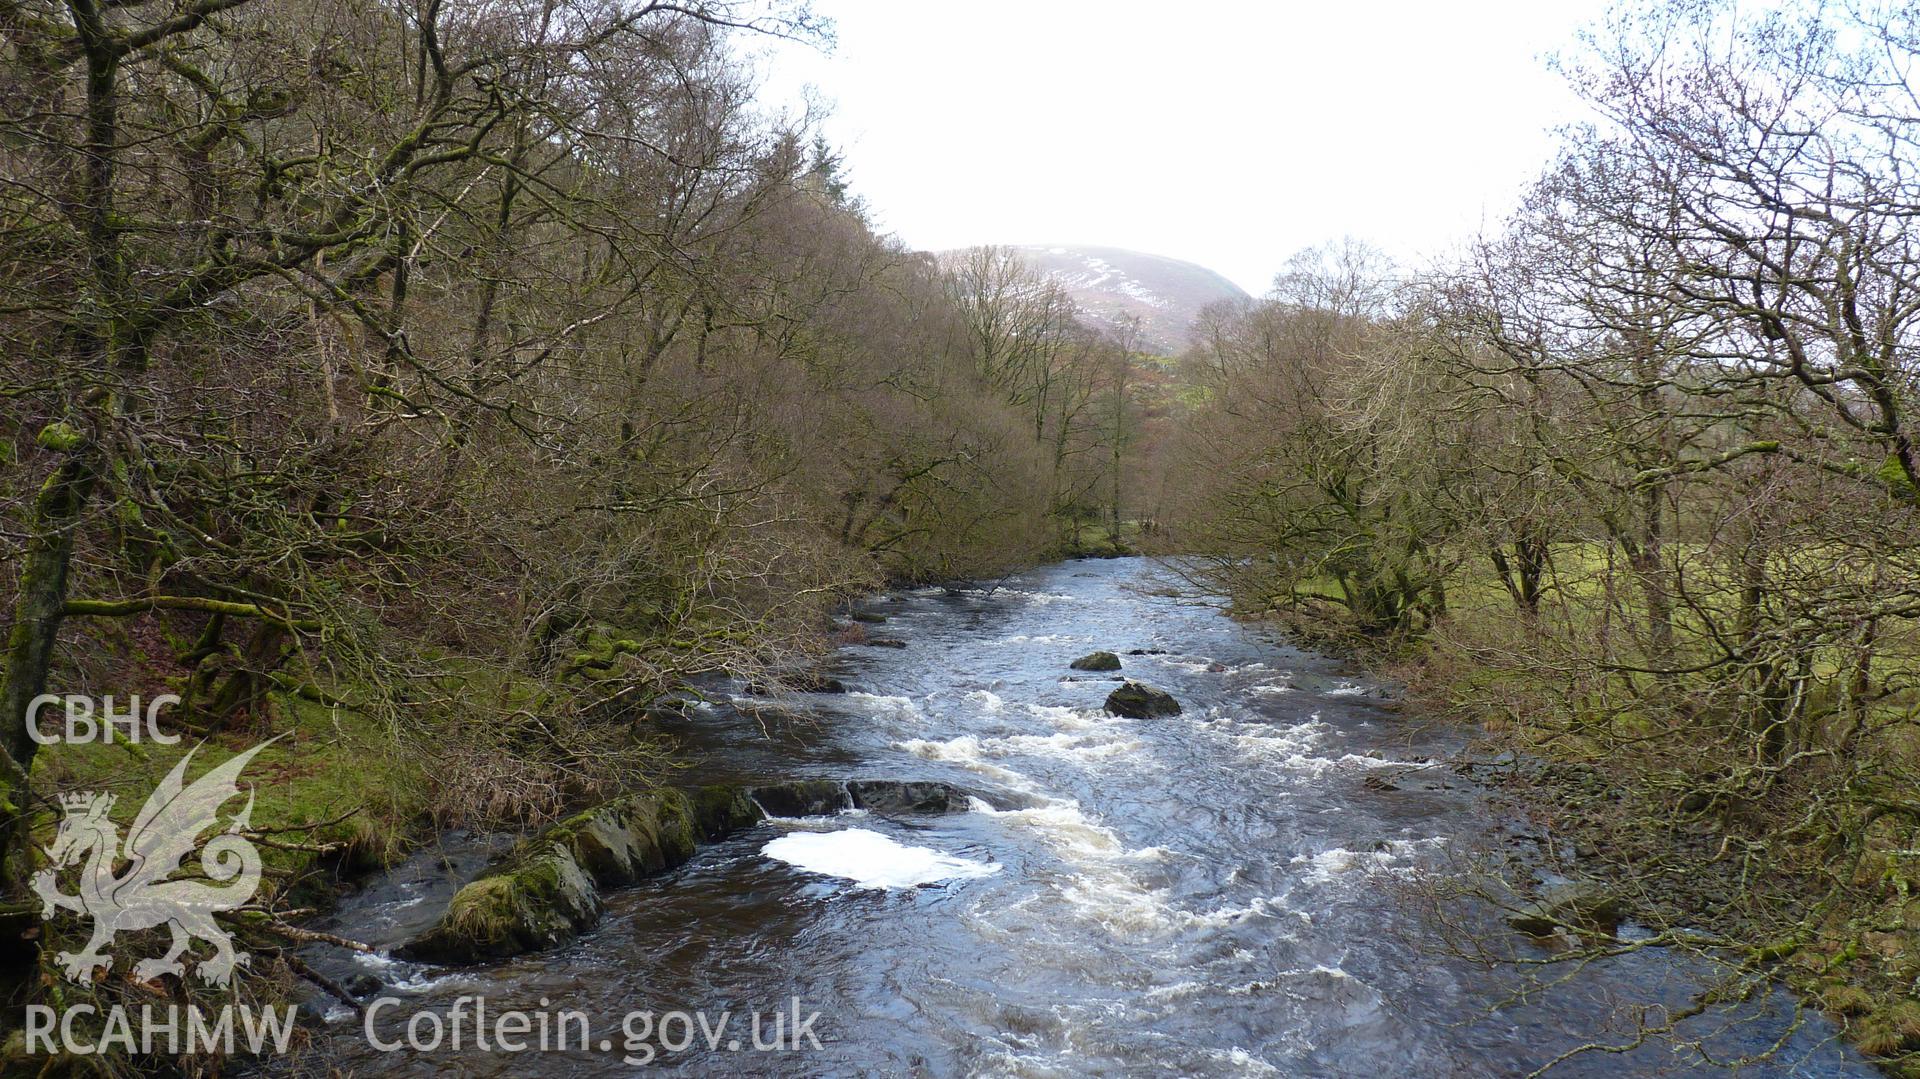 View upstream of River Claerwen from Bridge crossing at SN90076156. Looking west south west. Photographed for Archaeological Desk Based Assessment of Afon Claerwen, Elan Valley, Rhayader. Assessment by Archaeology Wales in 2017-18. Project no. 2573.